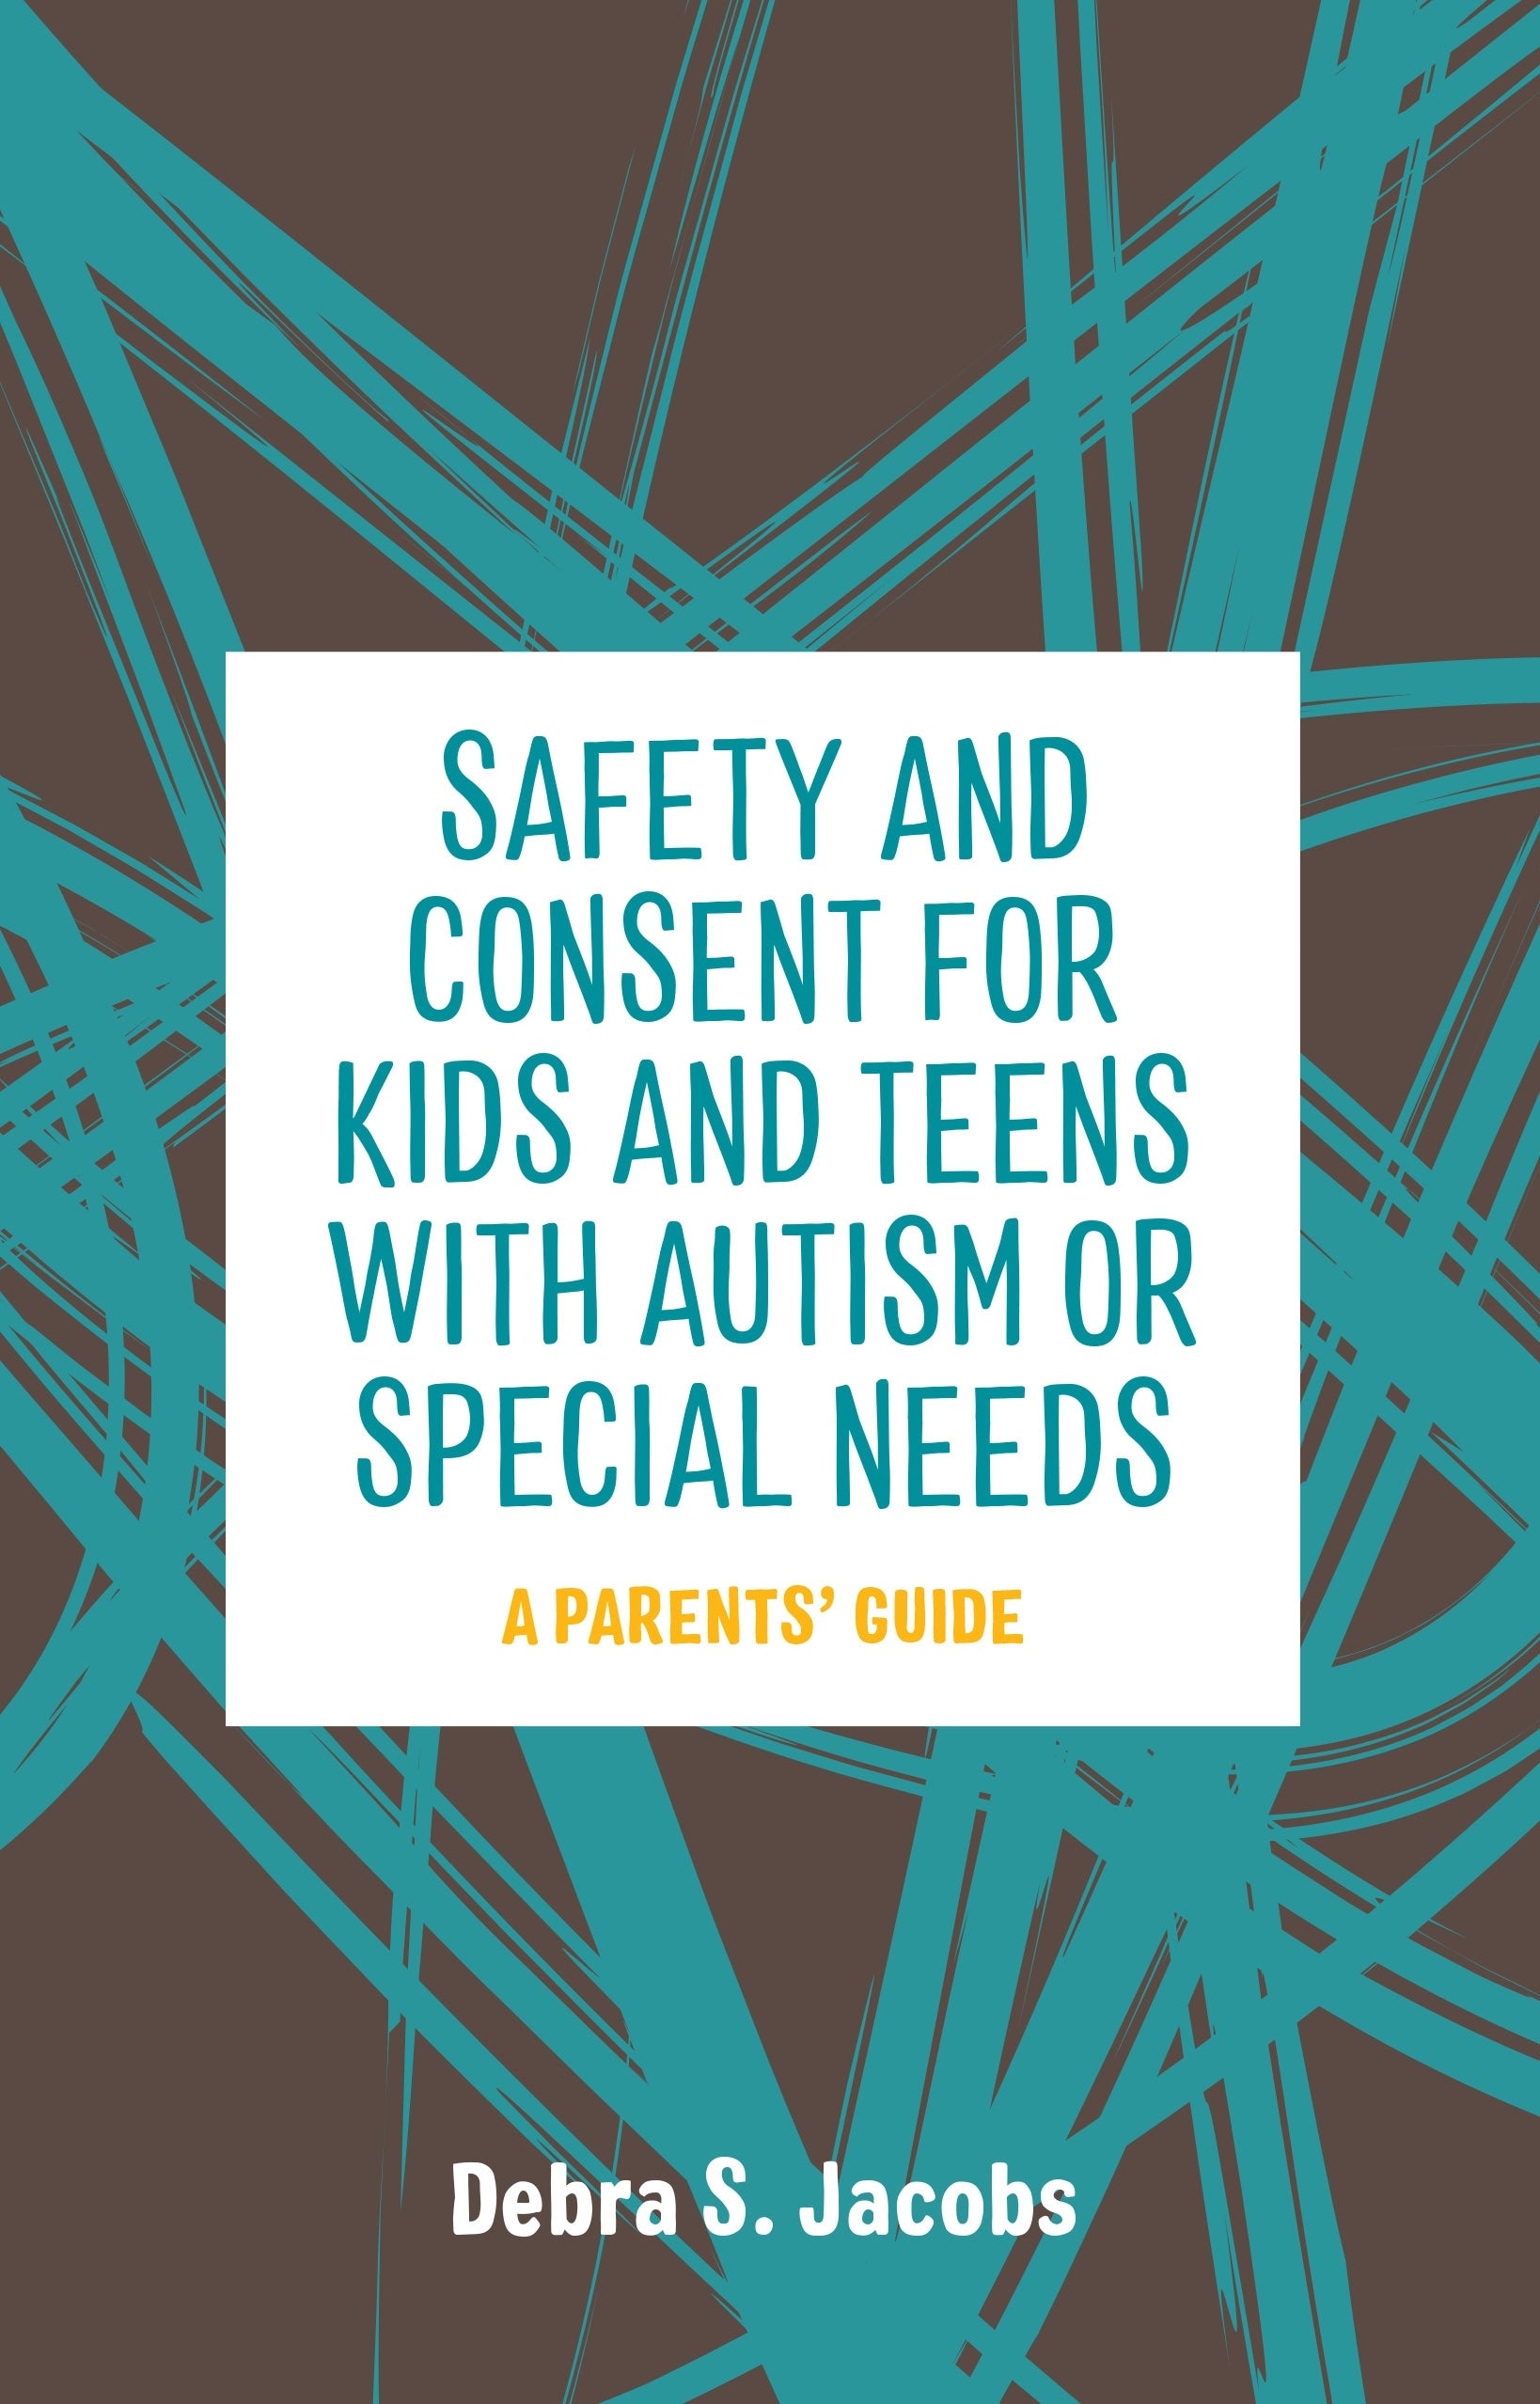 Safety and Consent for Kids and Teens with Autism or Special Needs by Debra Jacobs